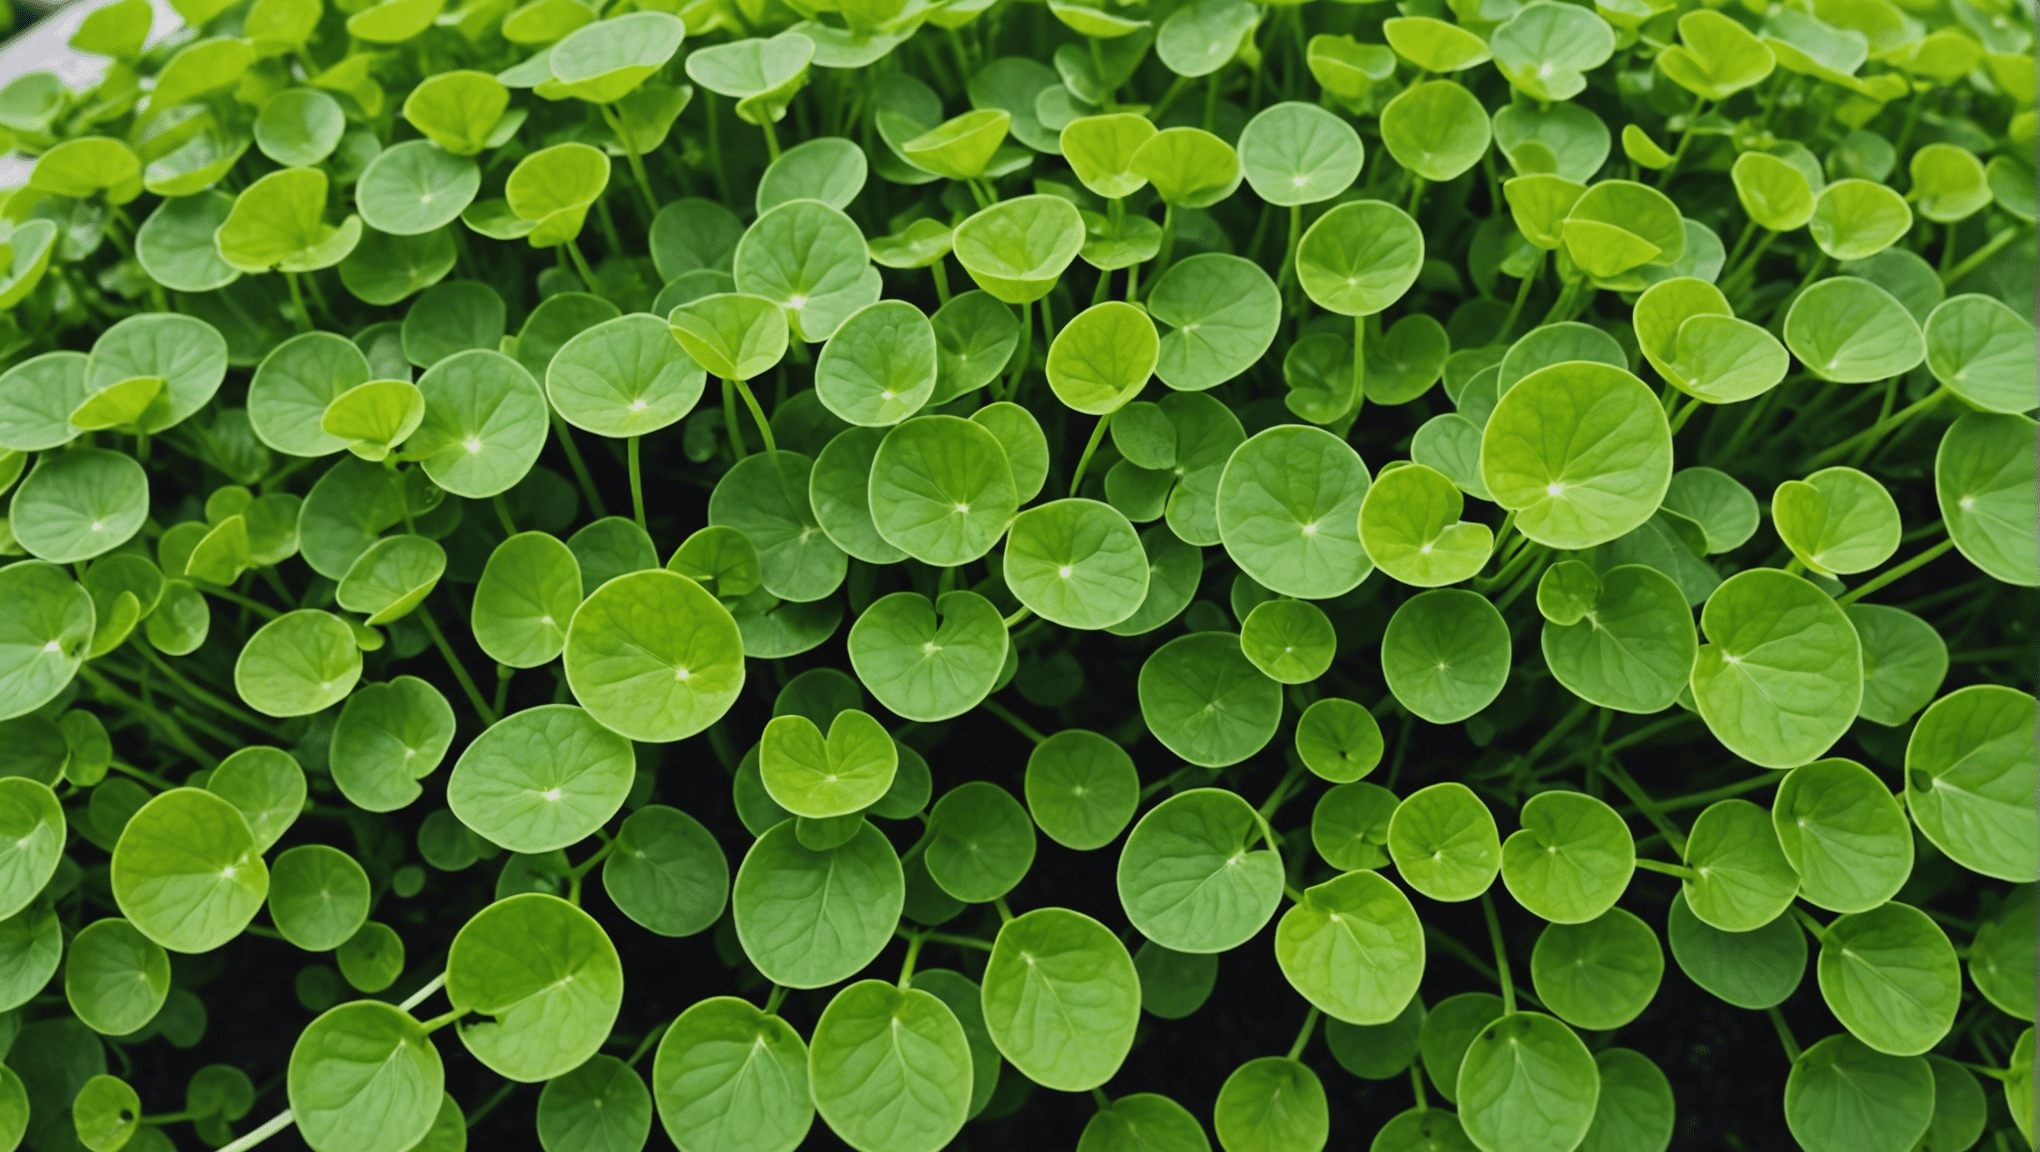 discover the potential of watercress seeds as the next superfood and unlock their health benefits. learn more about their nutritional value and culinary uses.